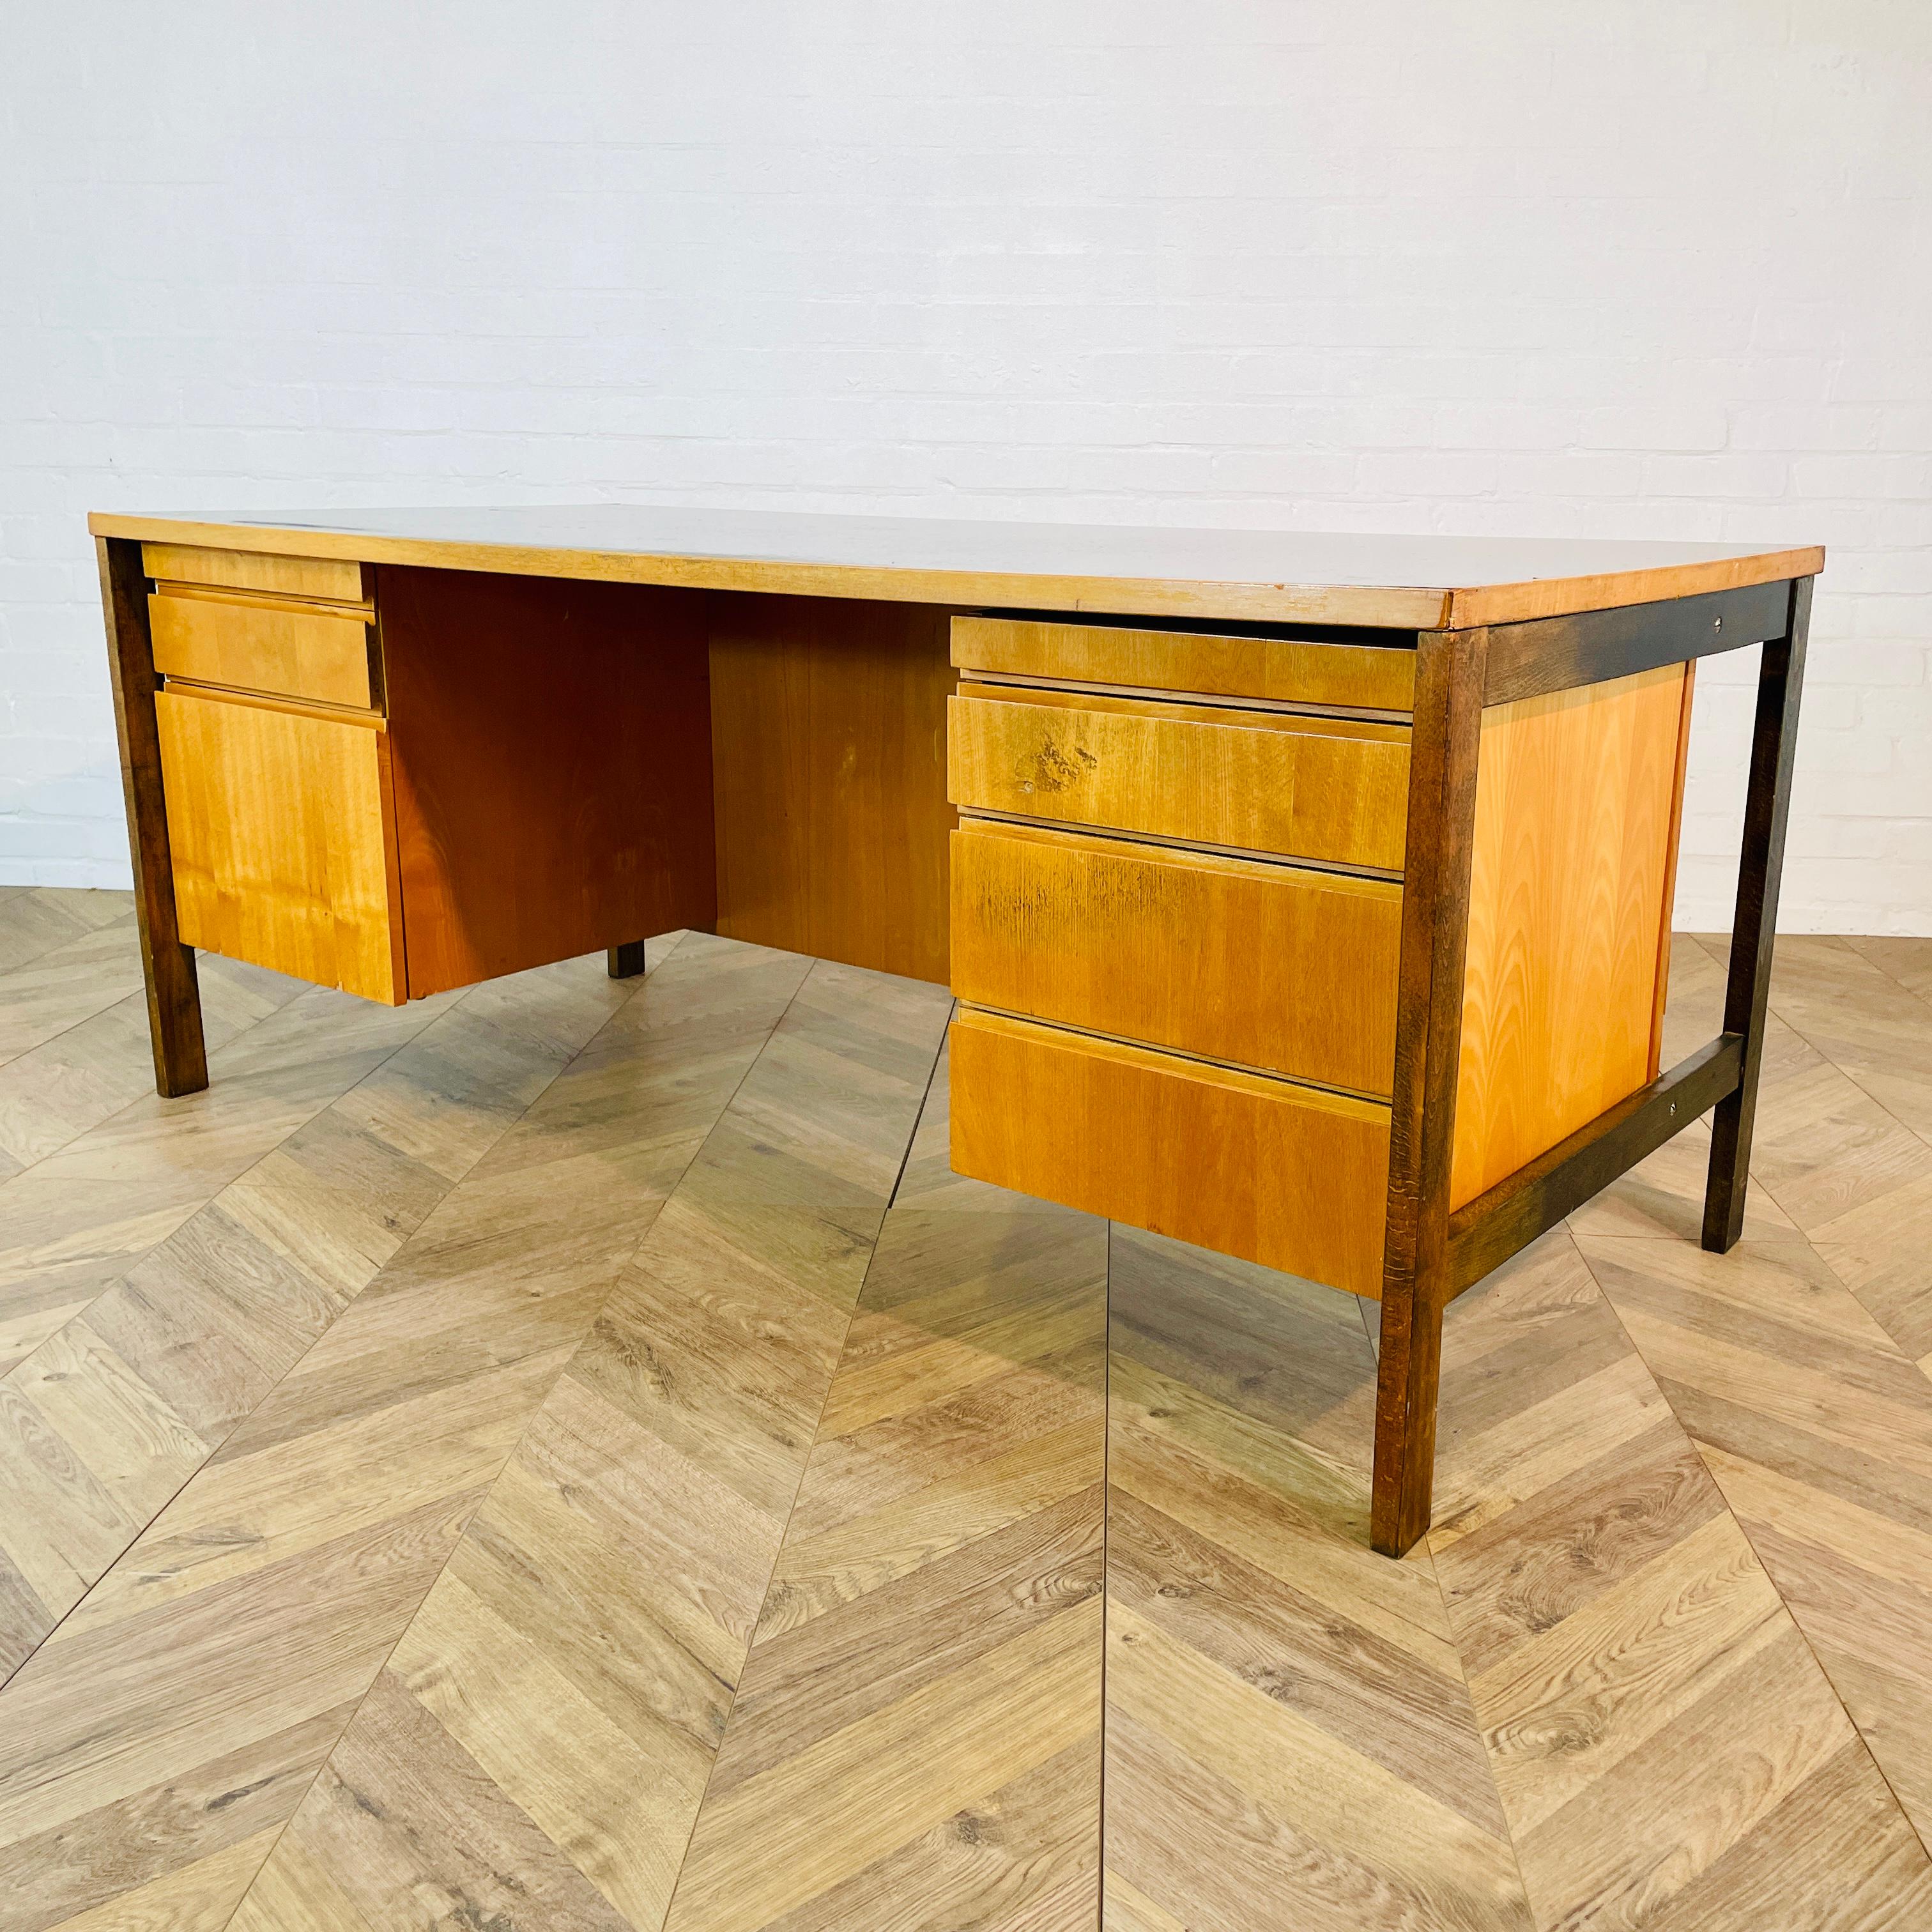 A Beautiful Large Executive Desk Attributed to Jens Risom. Circa 1960s.

The desk is in good vintage condition with small age related marks and scuffs. (please see photos), with one visible mark to the top, but this does not effect its look or